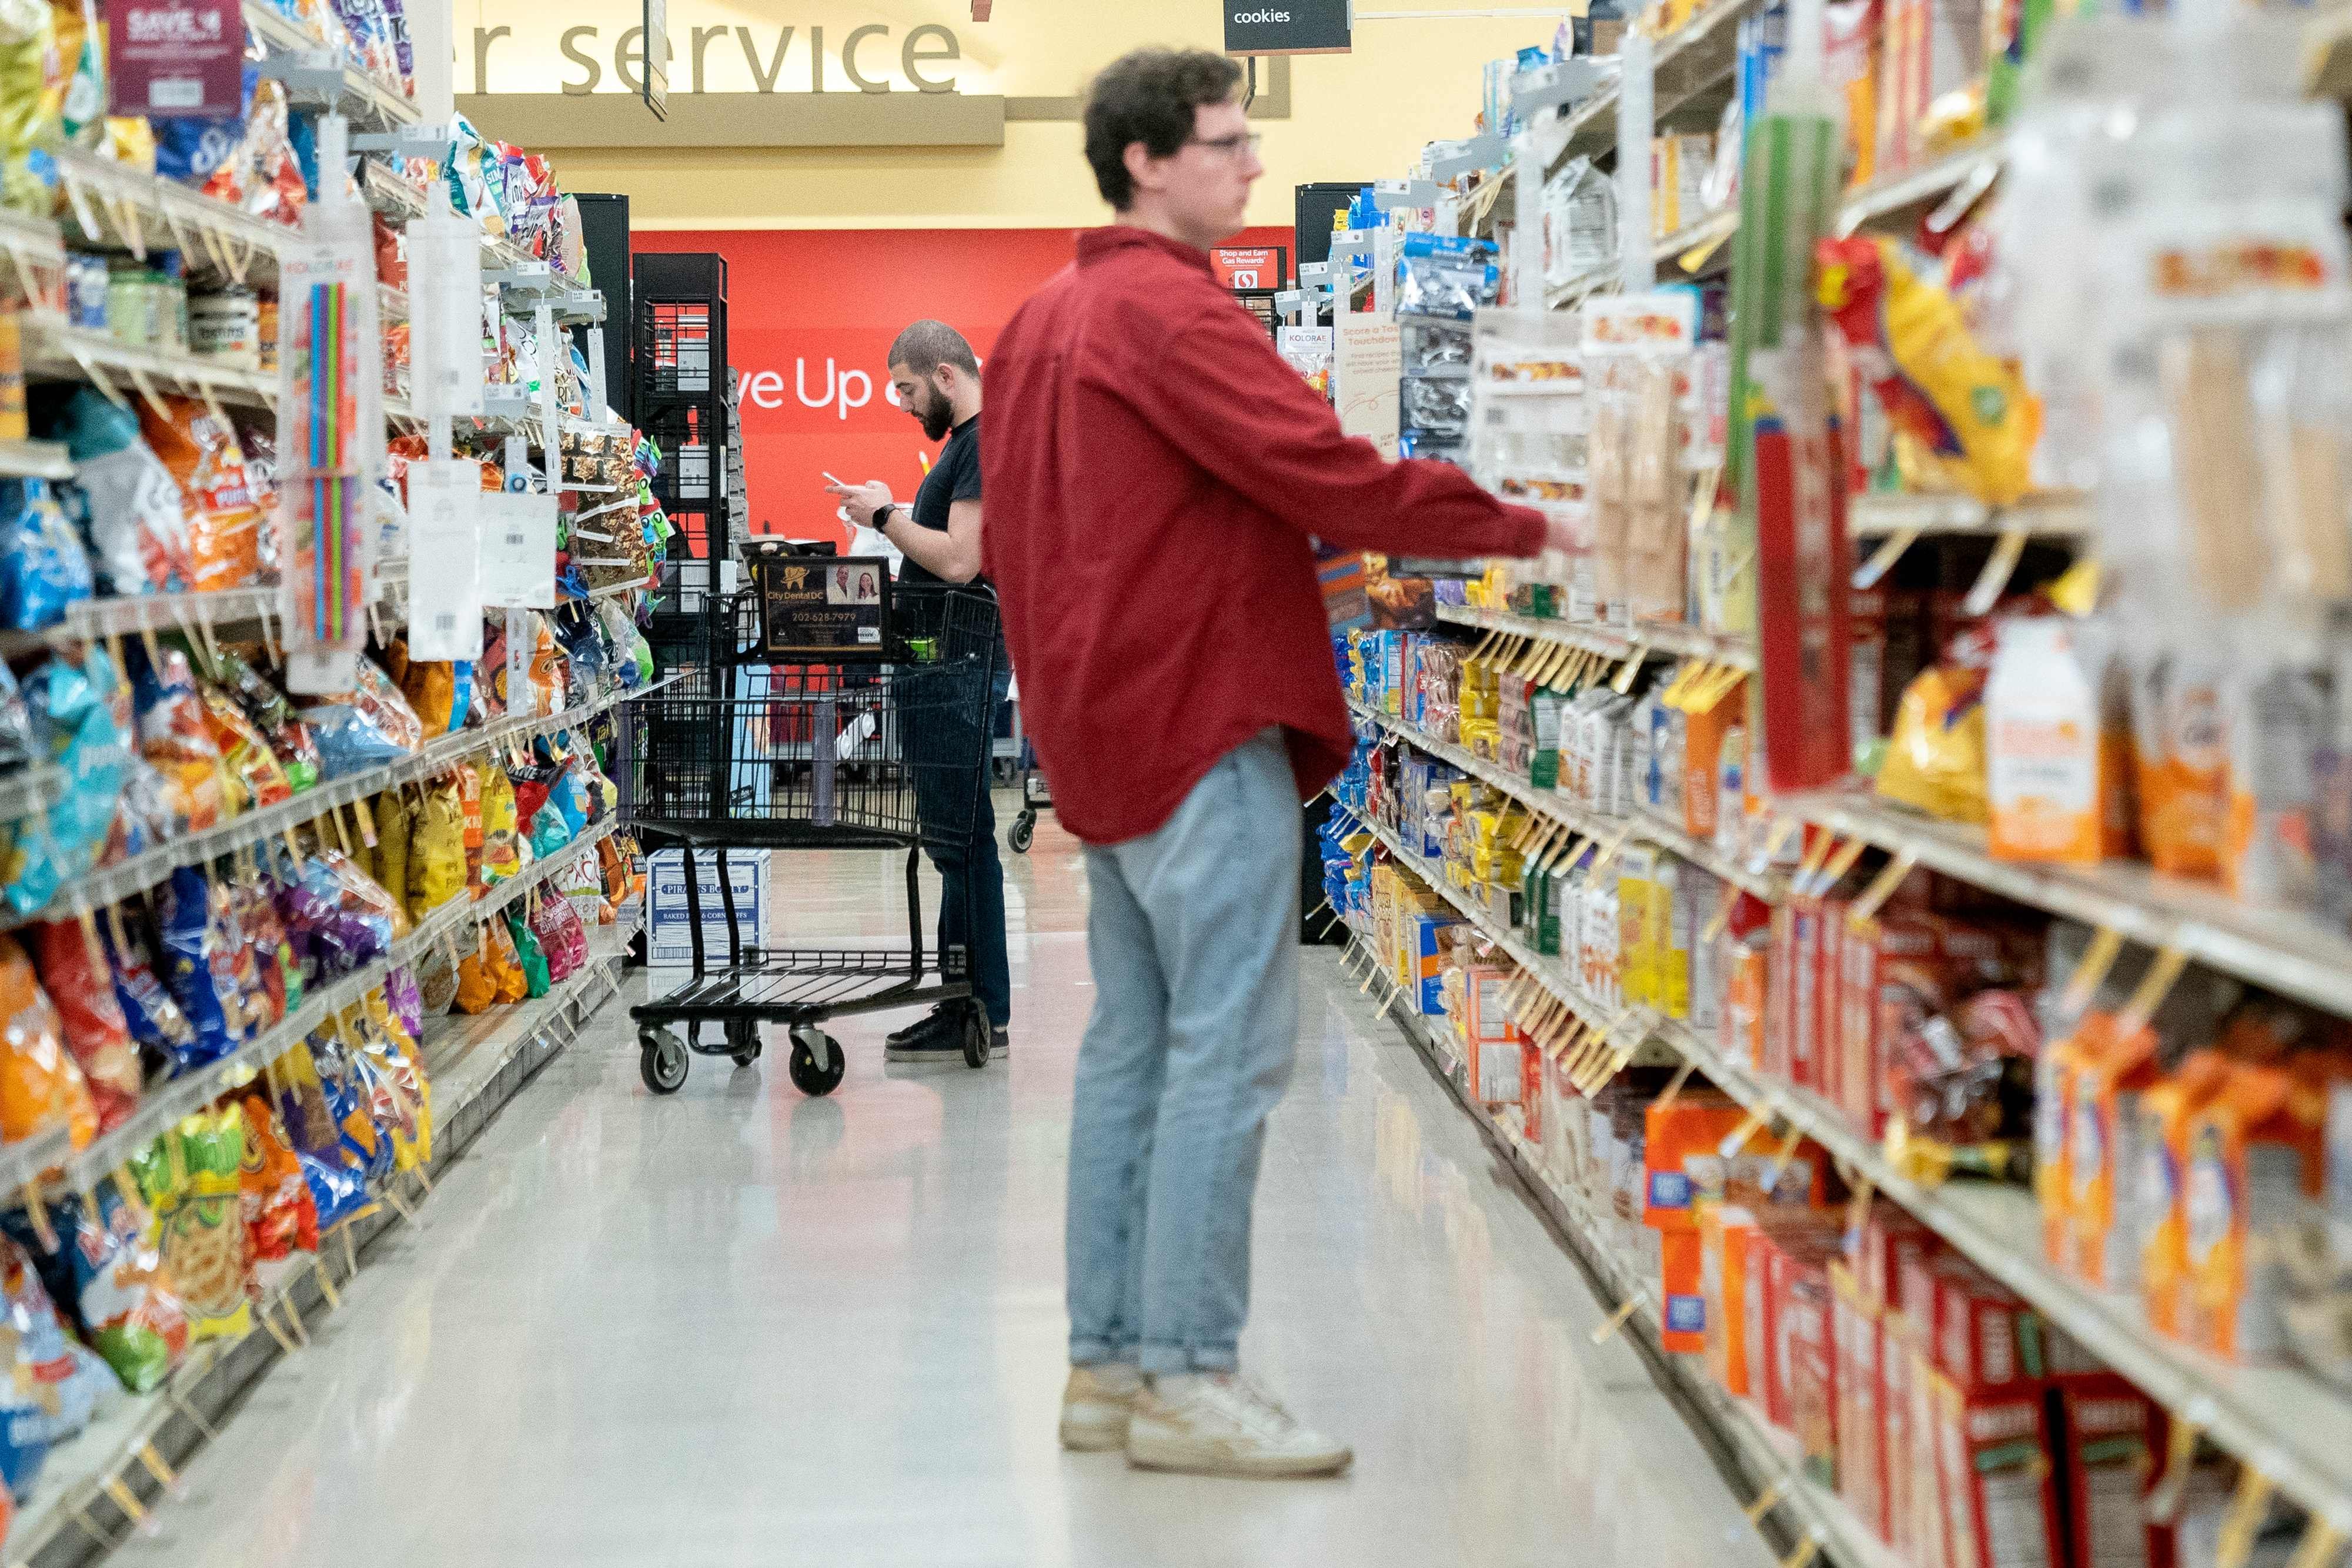 Shoppers in a grocery store in Washington on February 15. A fall in consumer and business spending in the West will drag on Asian economic growth. Photo: AFP